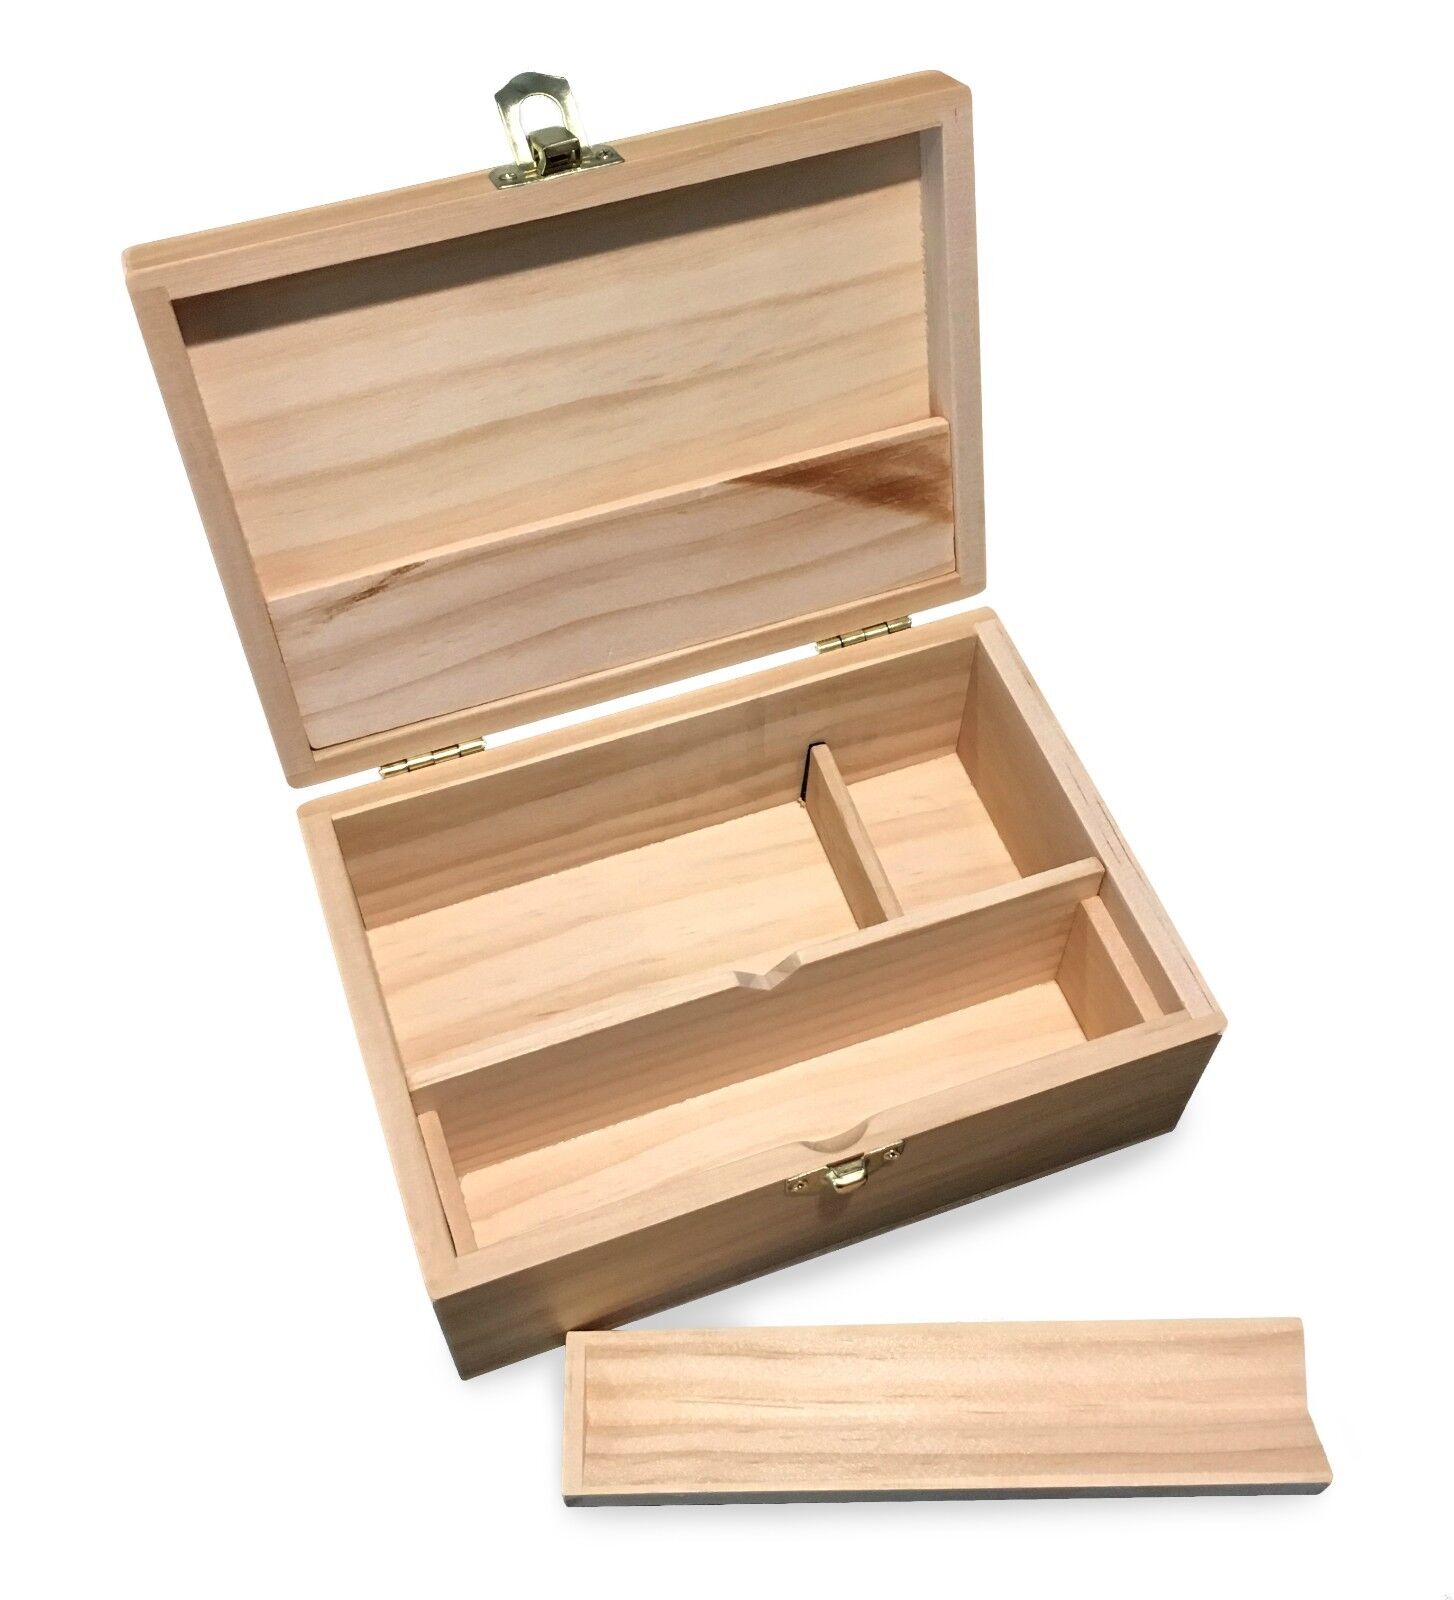 Medium Wooden Storage Box w/ Latching Lid, Rolling Jig & Adjustable Compartments